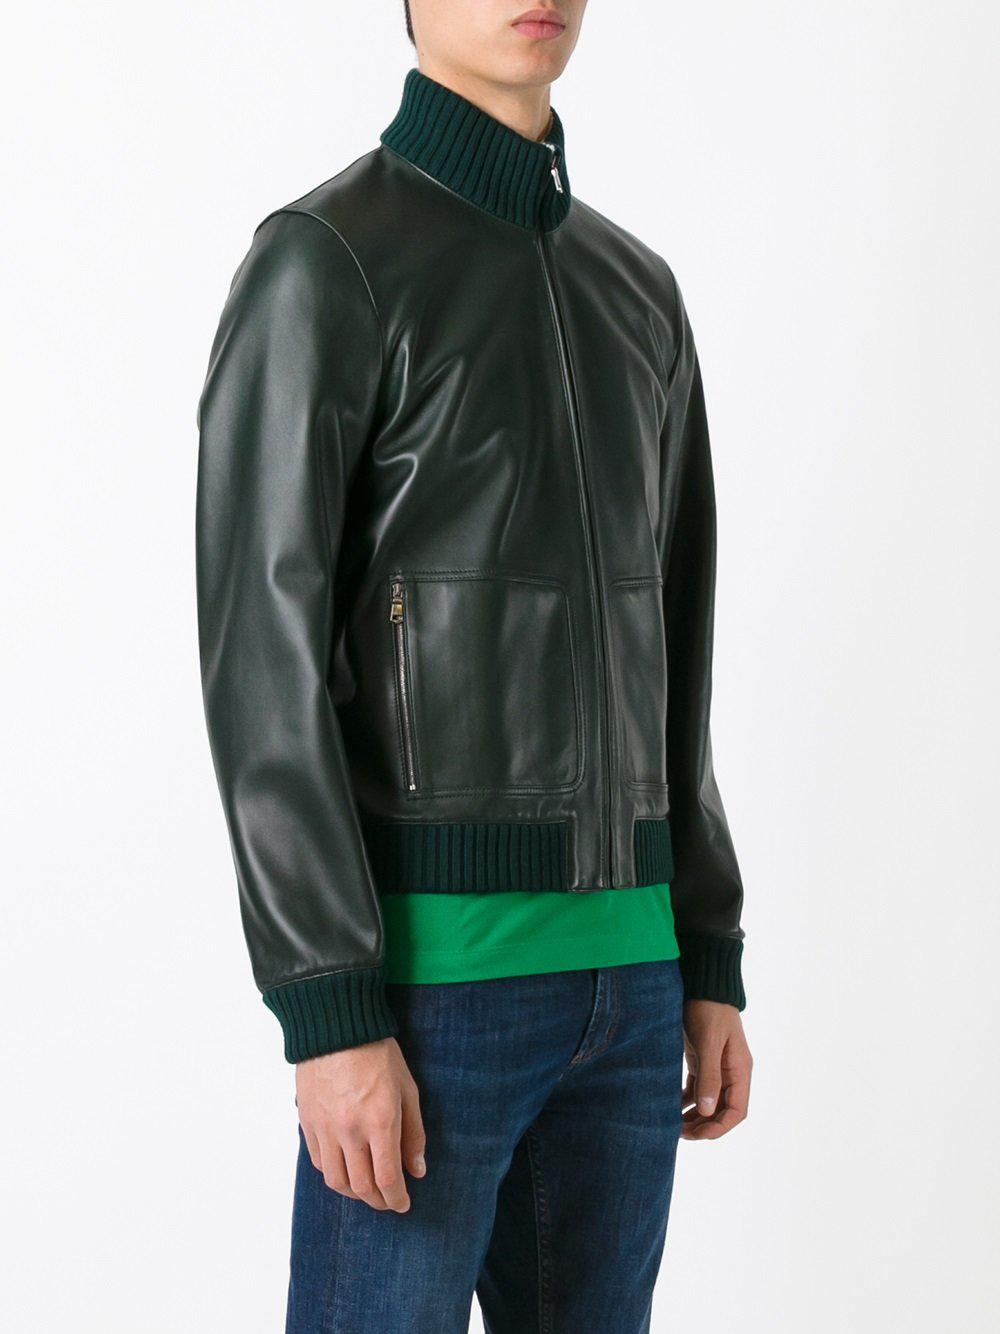 Lyst - Gucci Leather Bomber Jacket in Green for Men